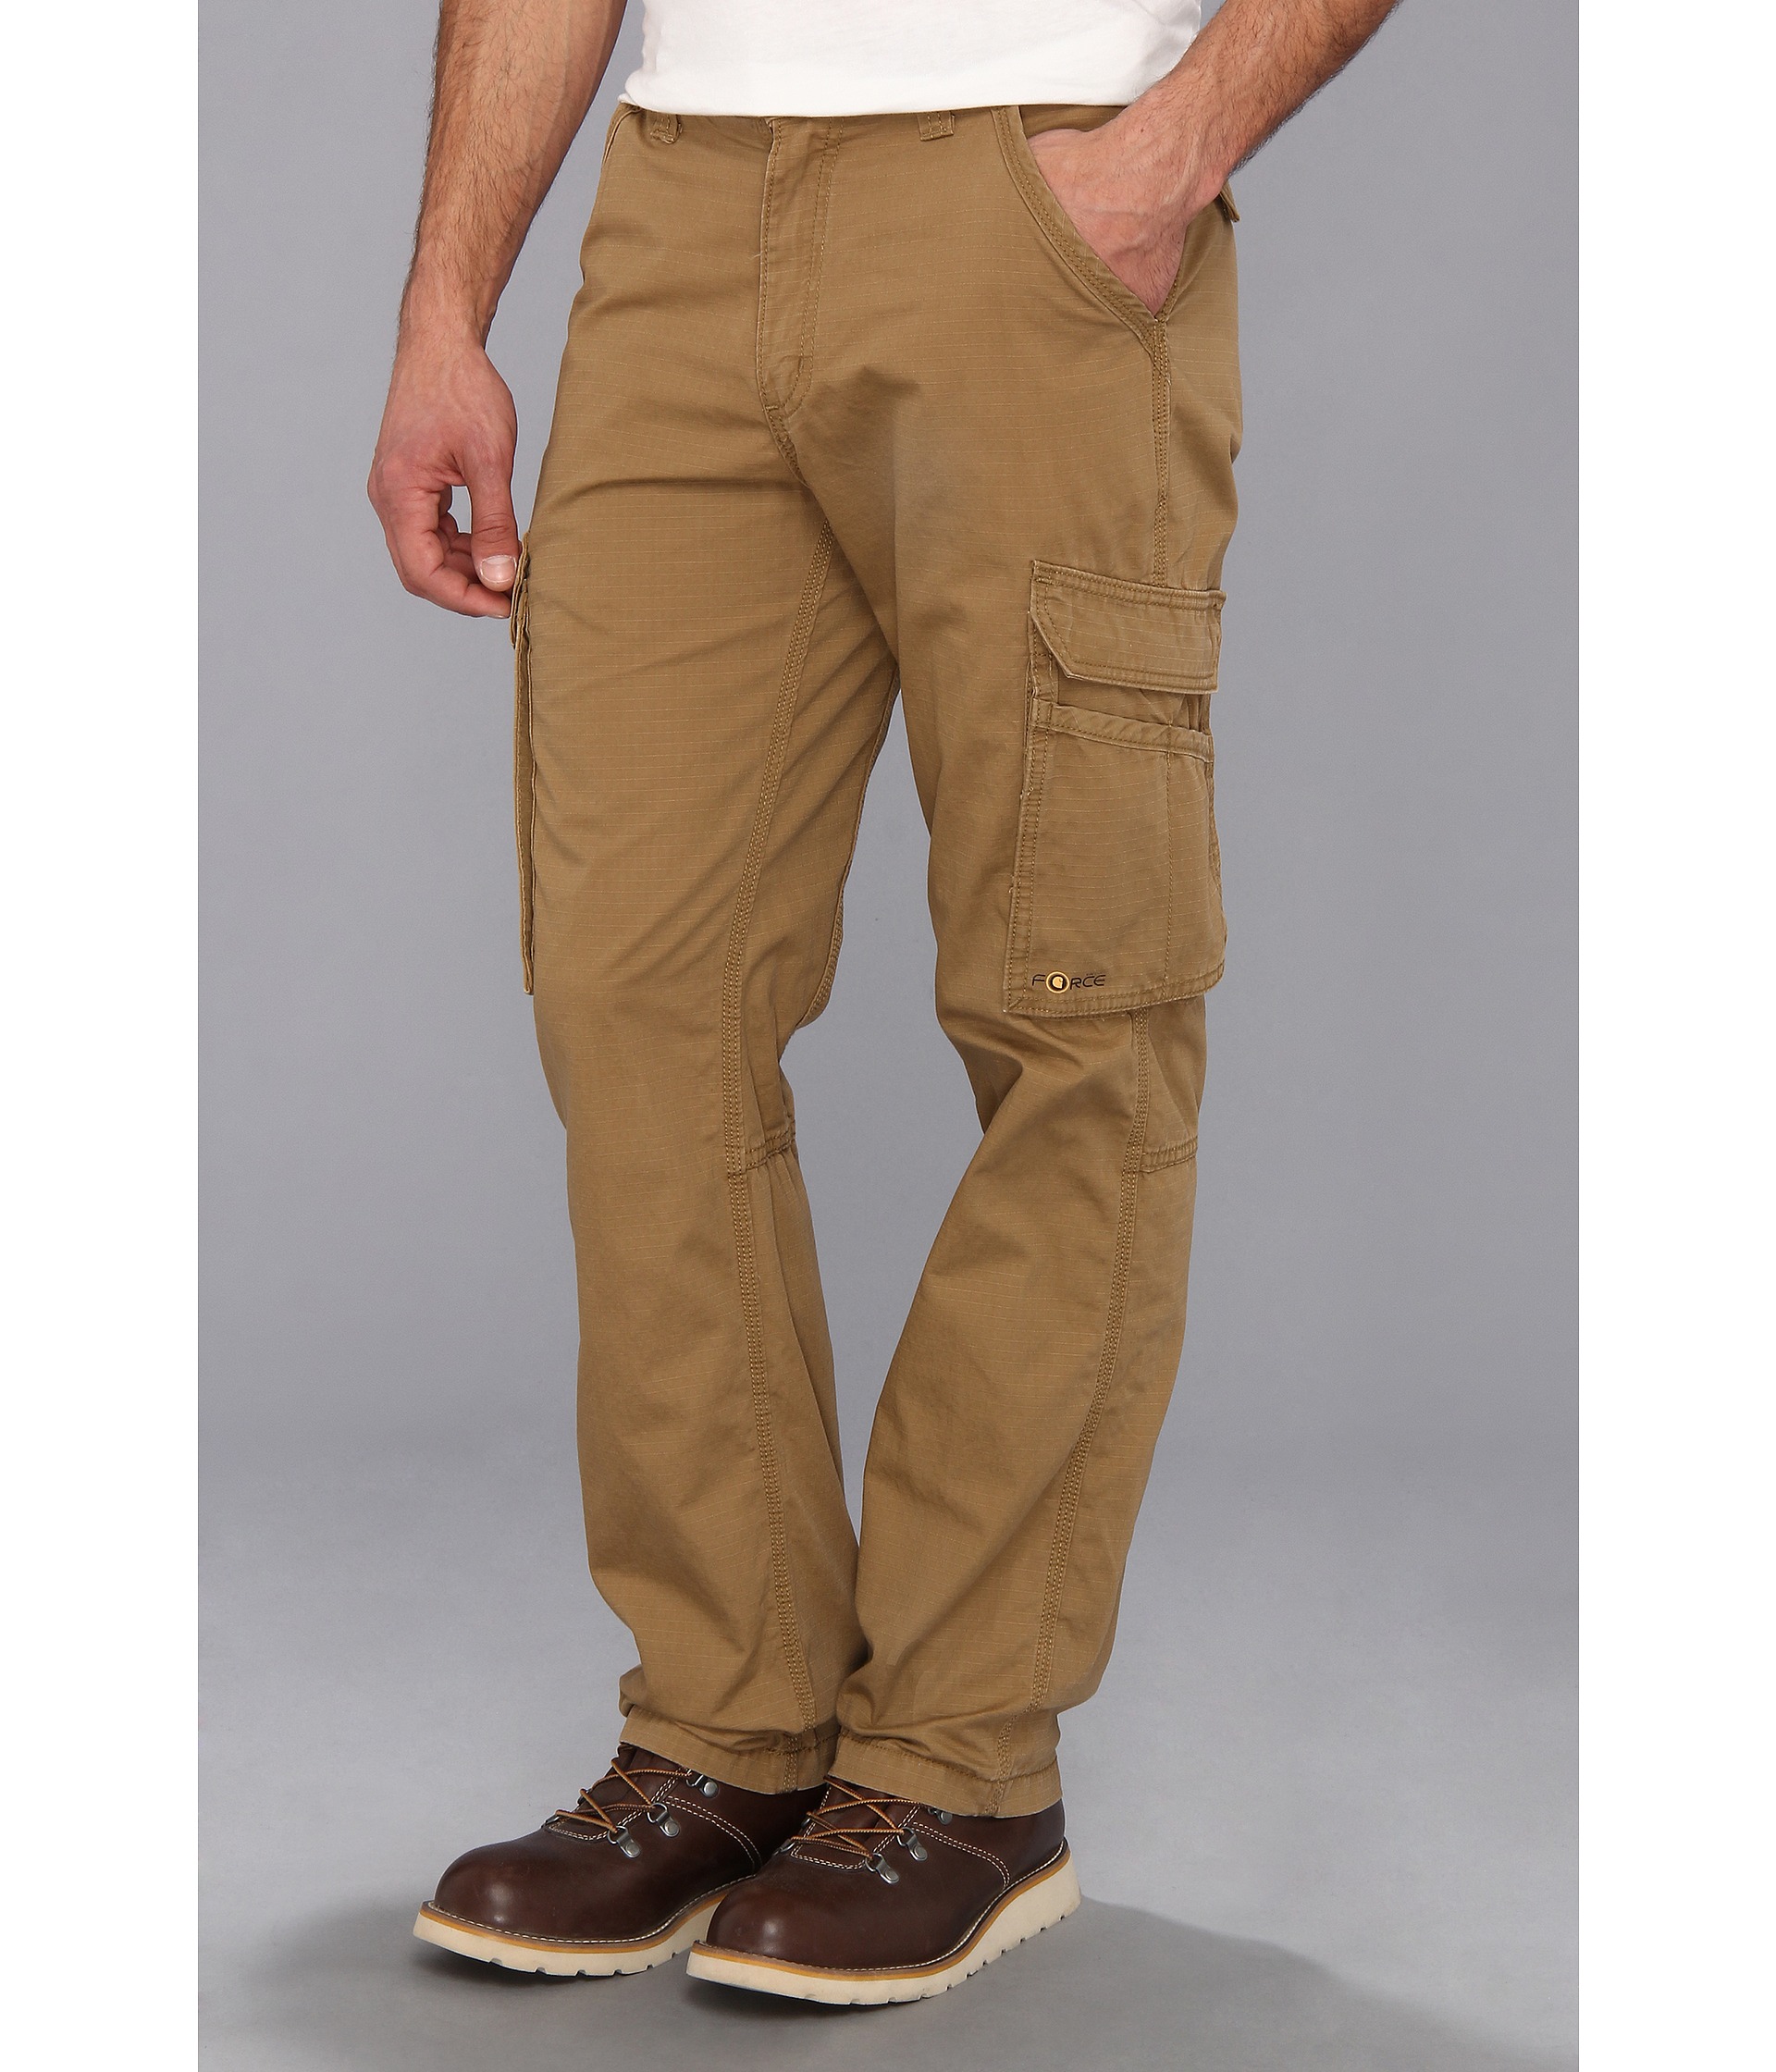 Carhartt Force Tappen Cargo Pant - Zappos.com Free Shipping BOTH Ways